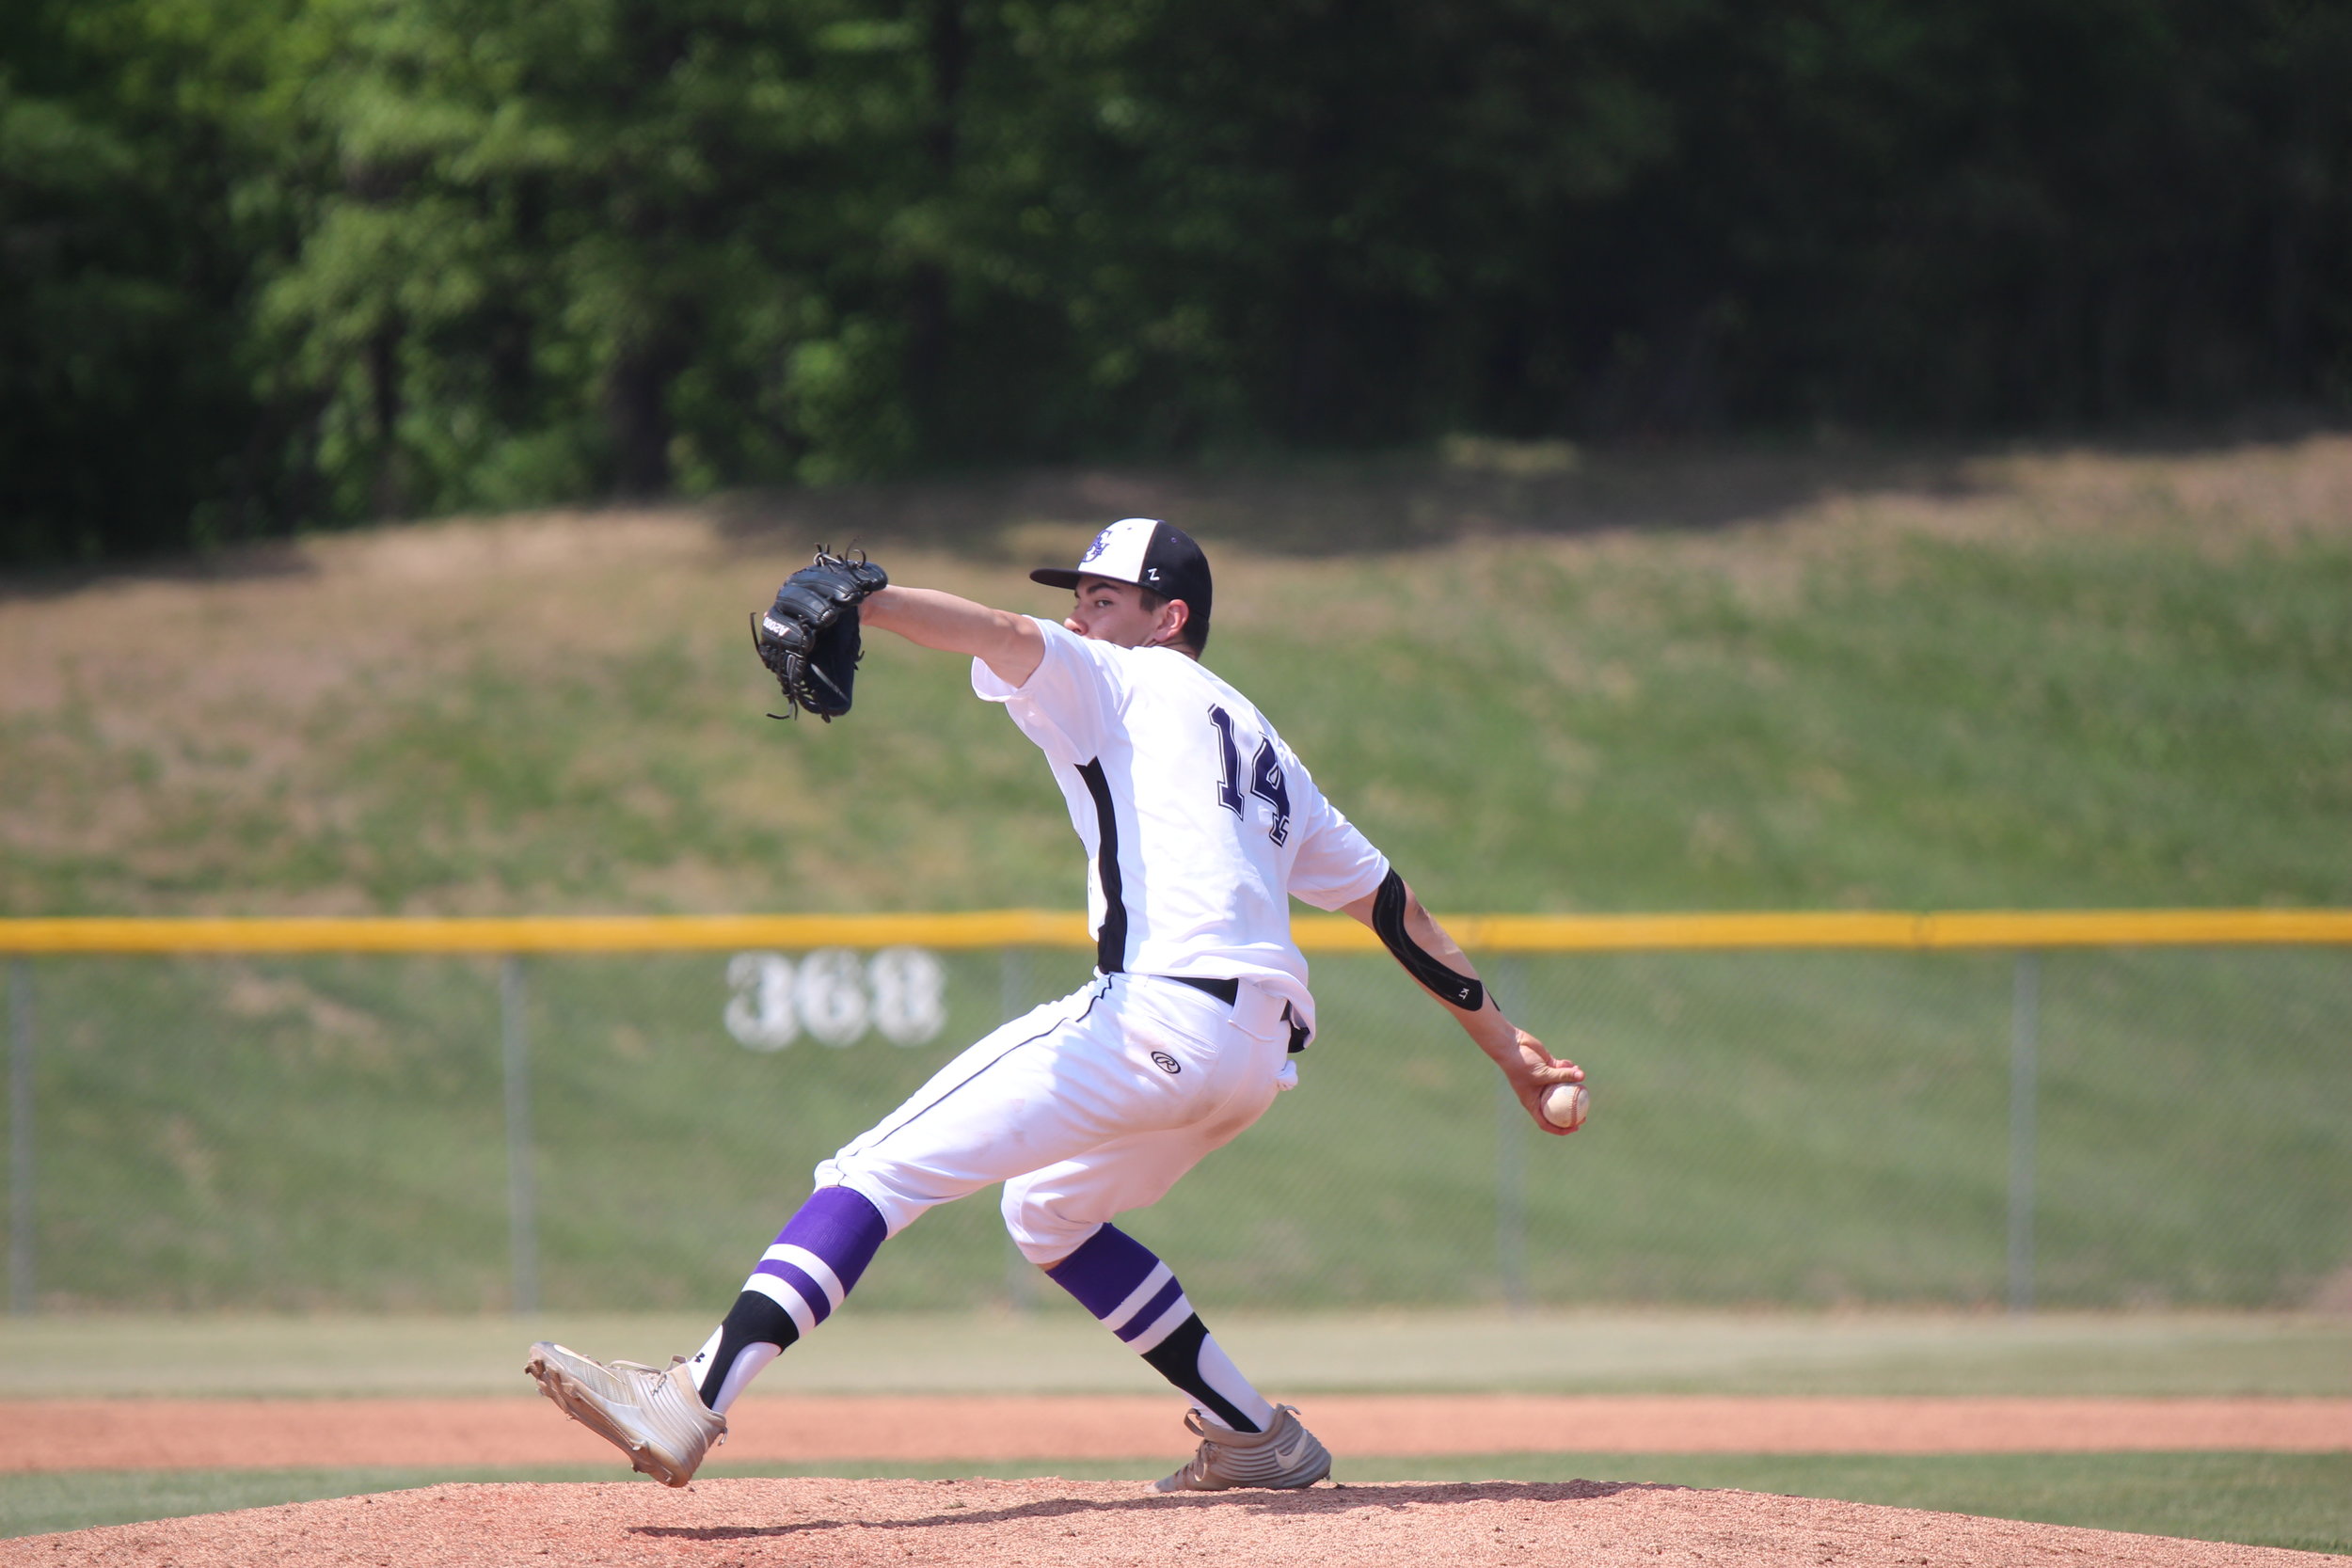 Brougham Becomes 2nd Baseball All Stater At Park Hill South The Platte County Citizen